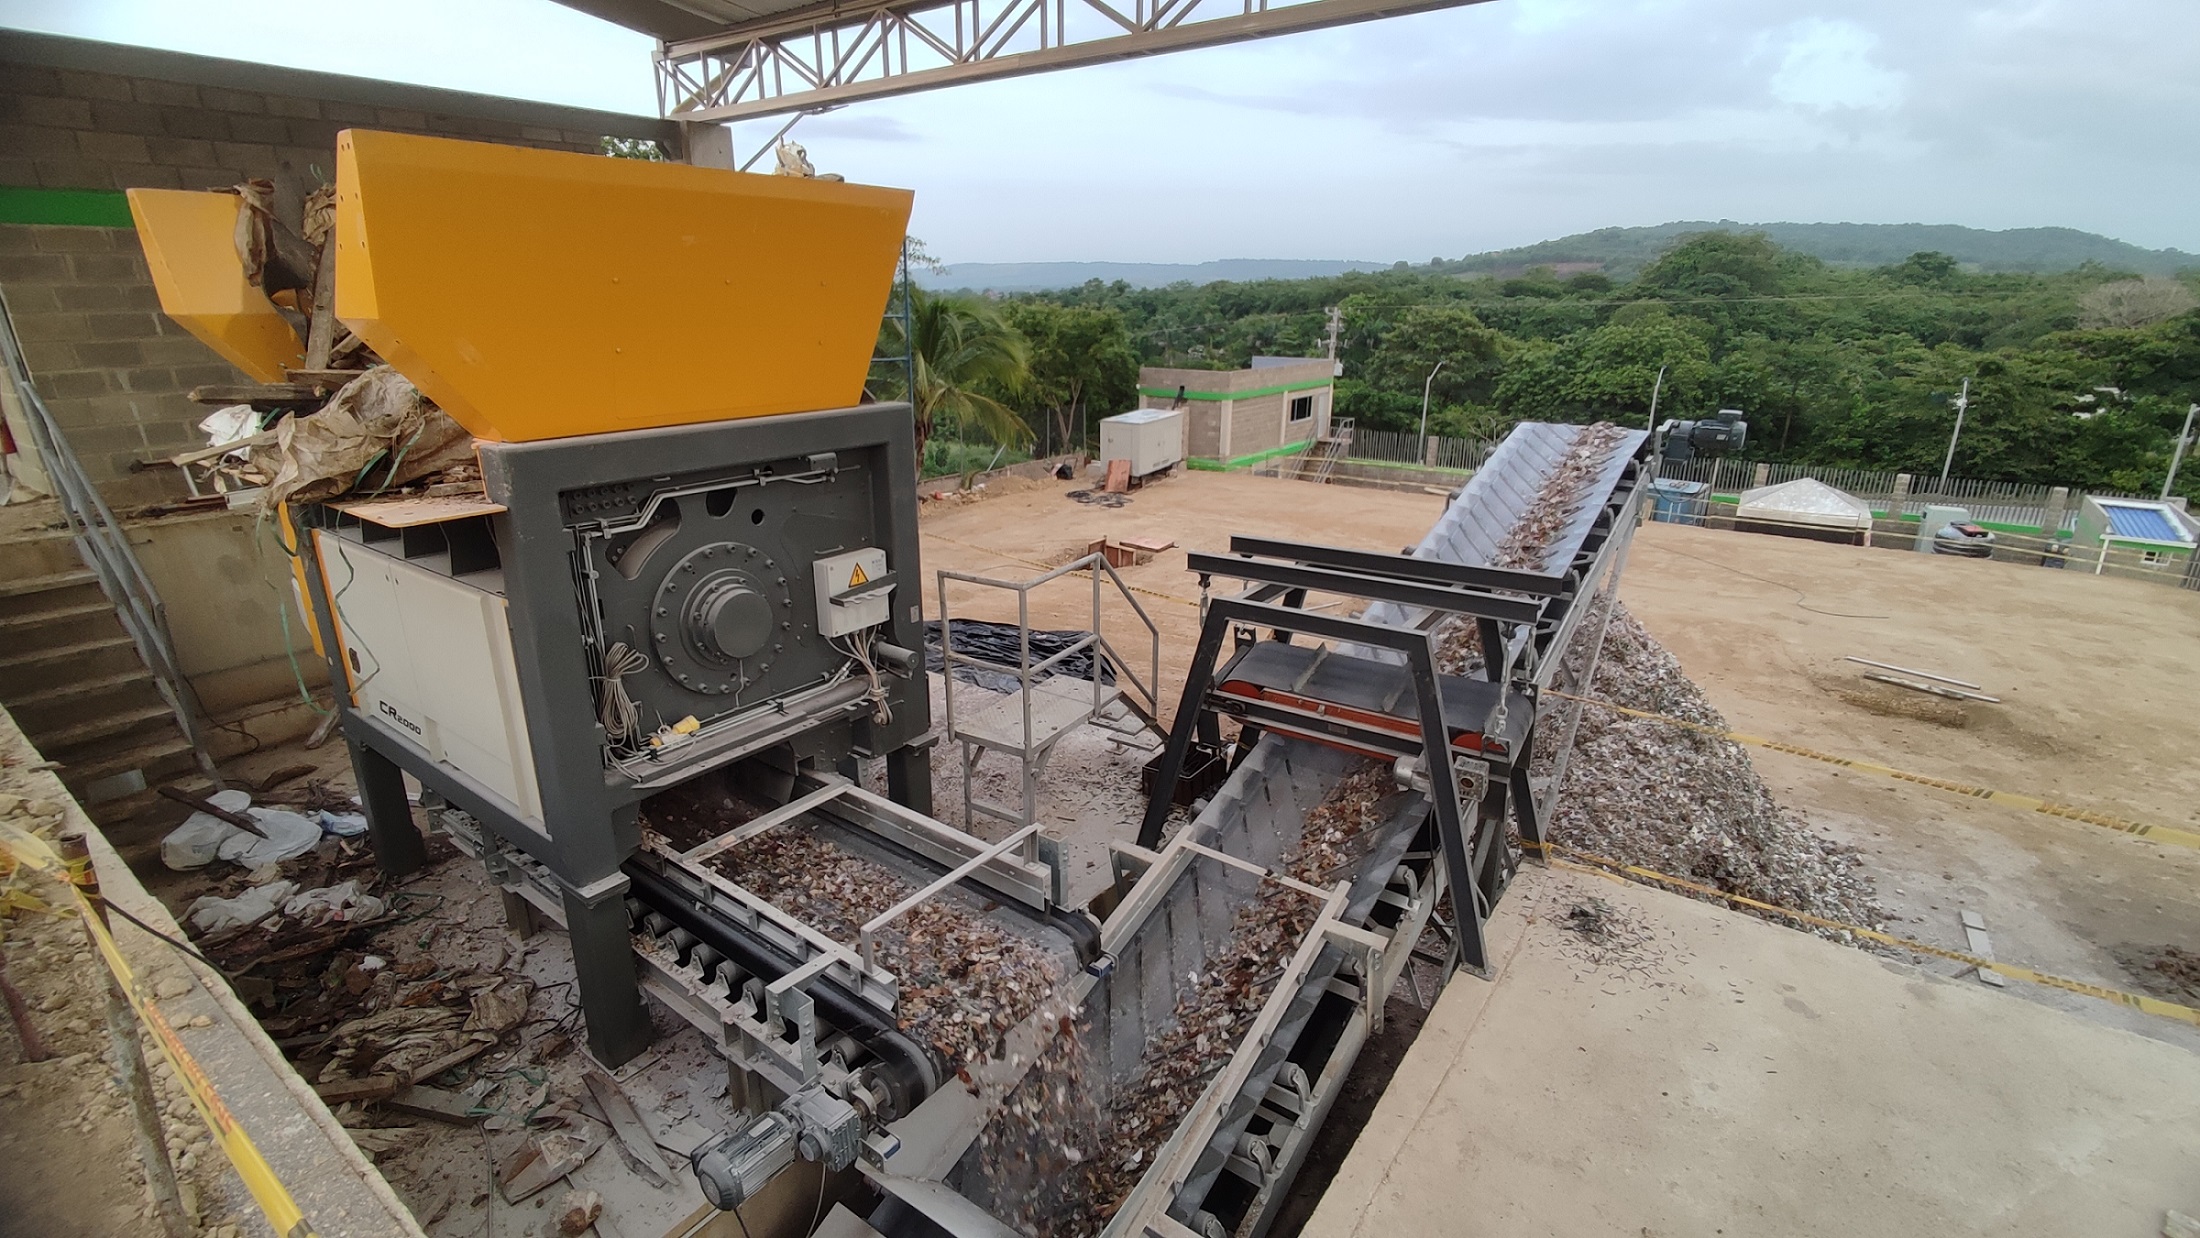 UNTHA shredder at the heart of new Columbian Energy-from-Waste plant